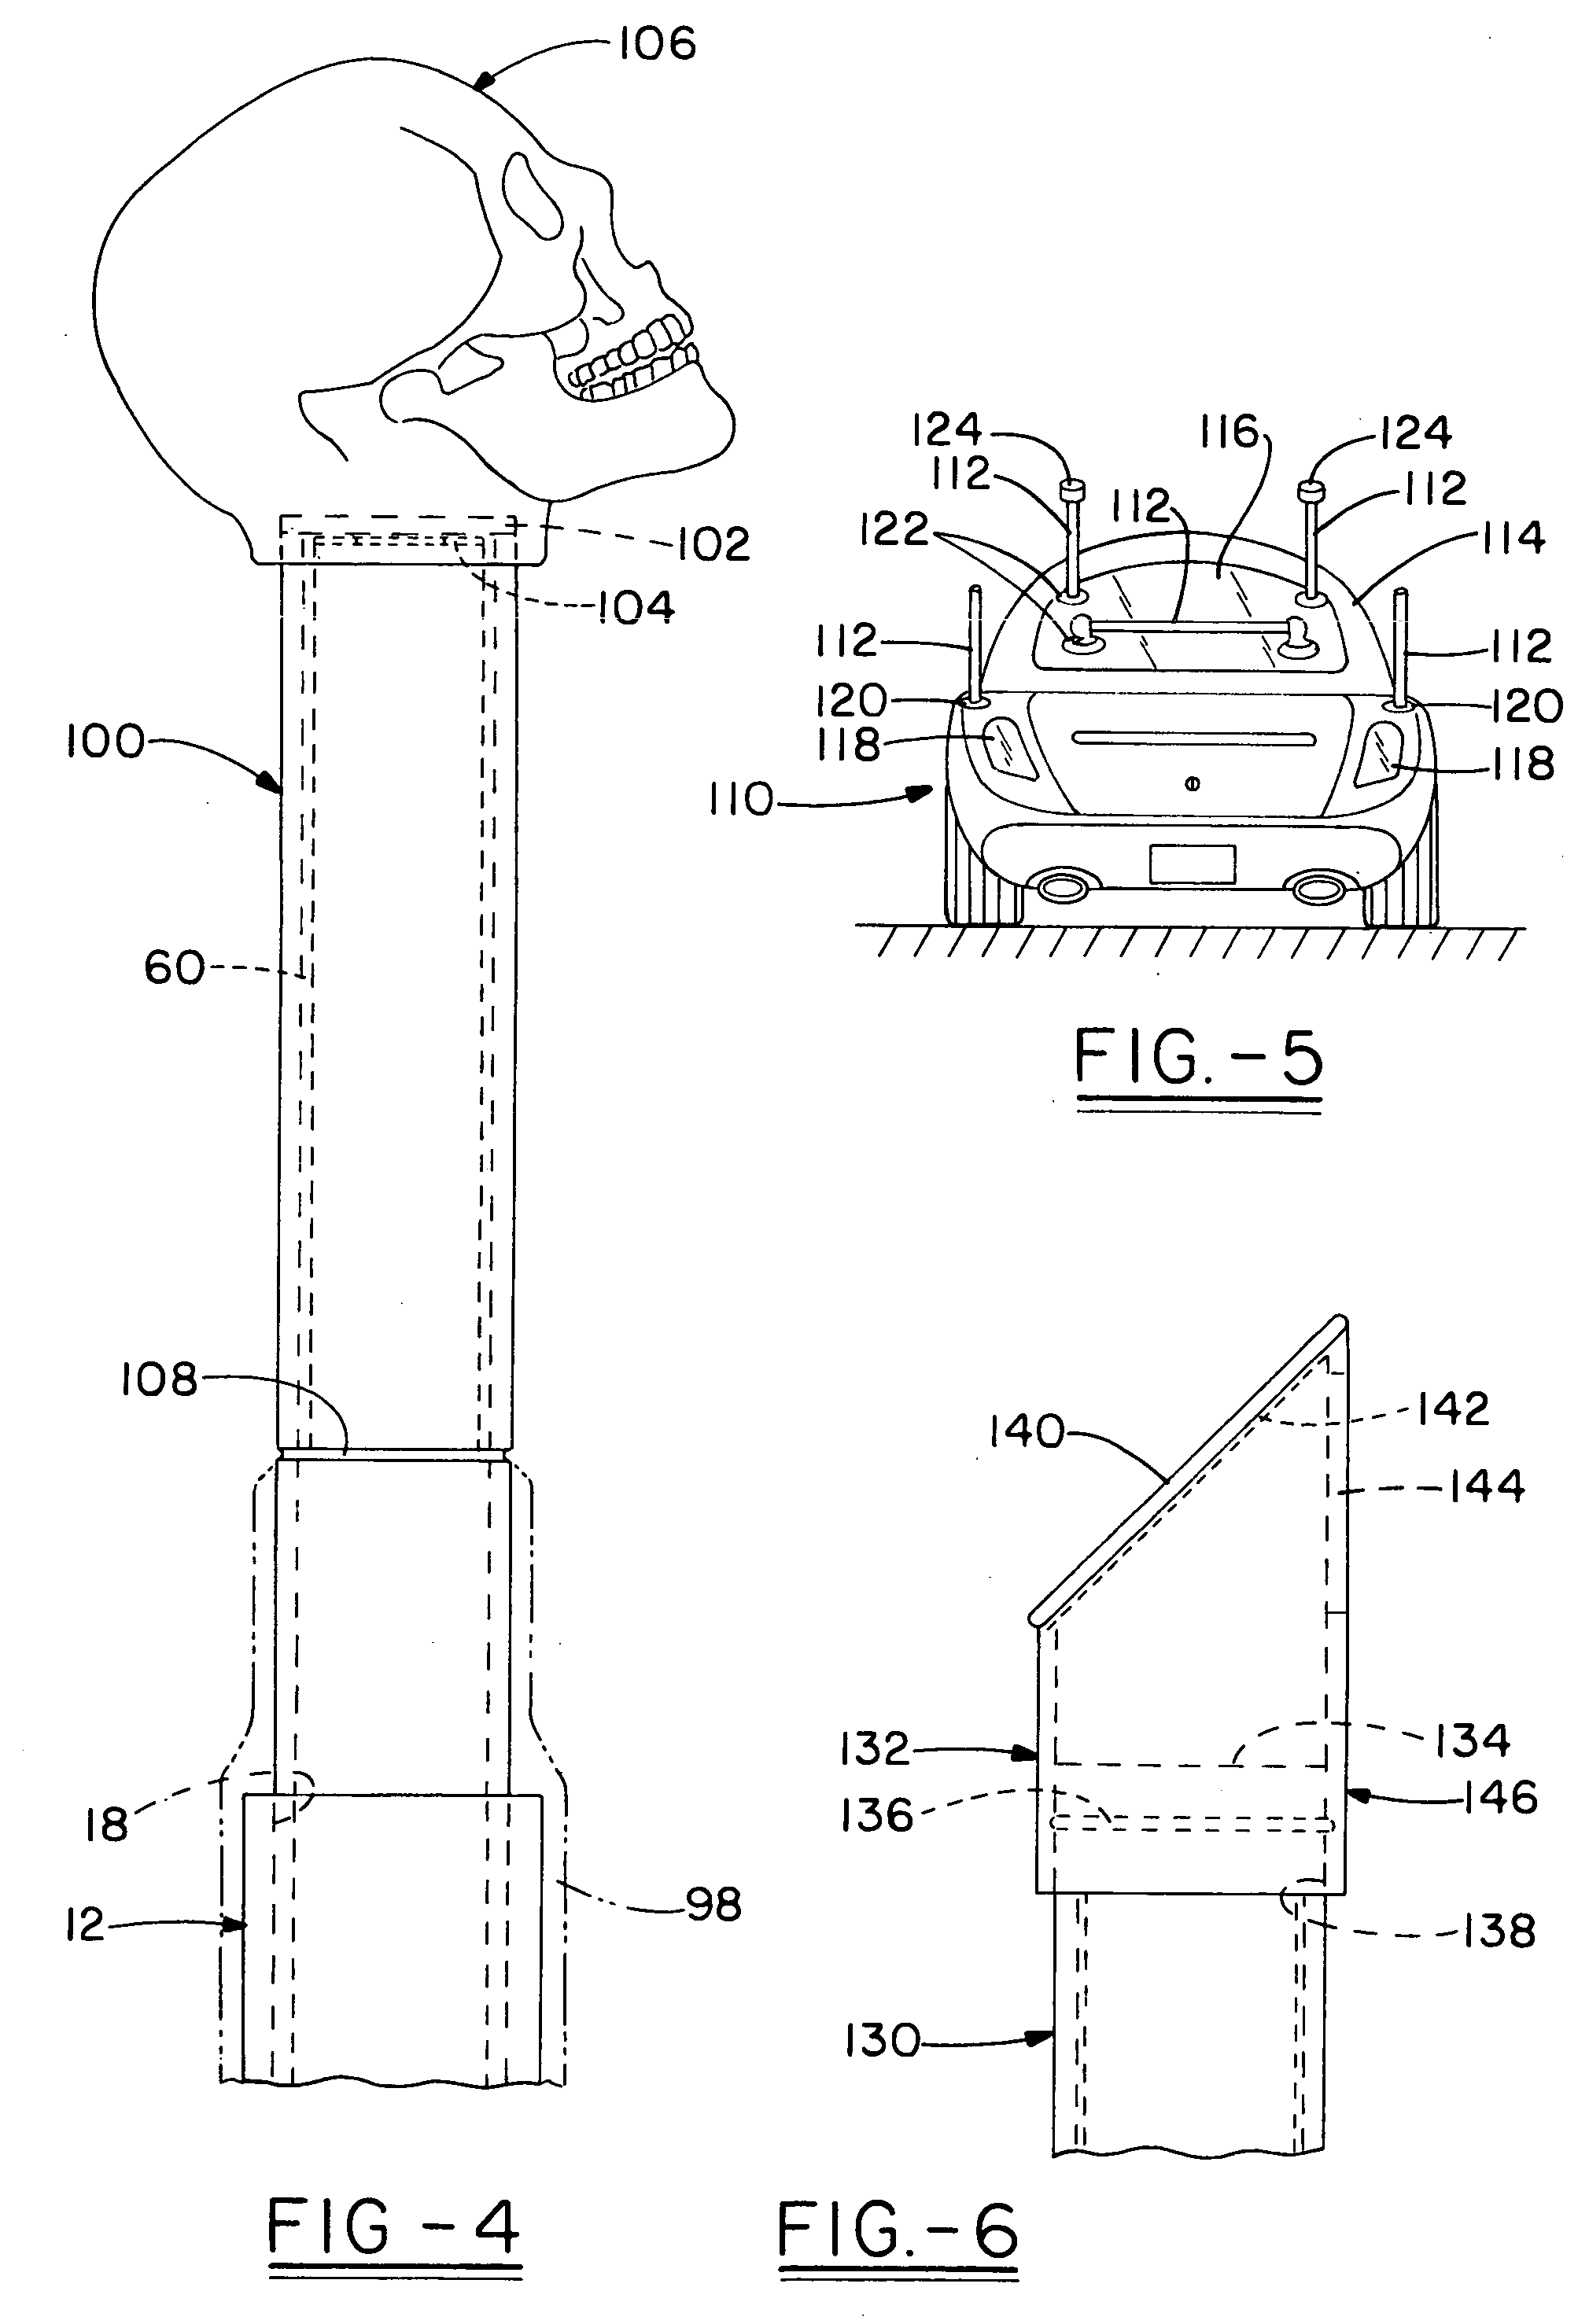 Interchangeable simulated neon light tube assemblies and related accessories for use with lighting devices